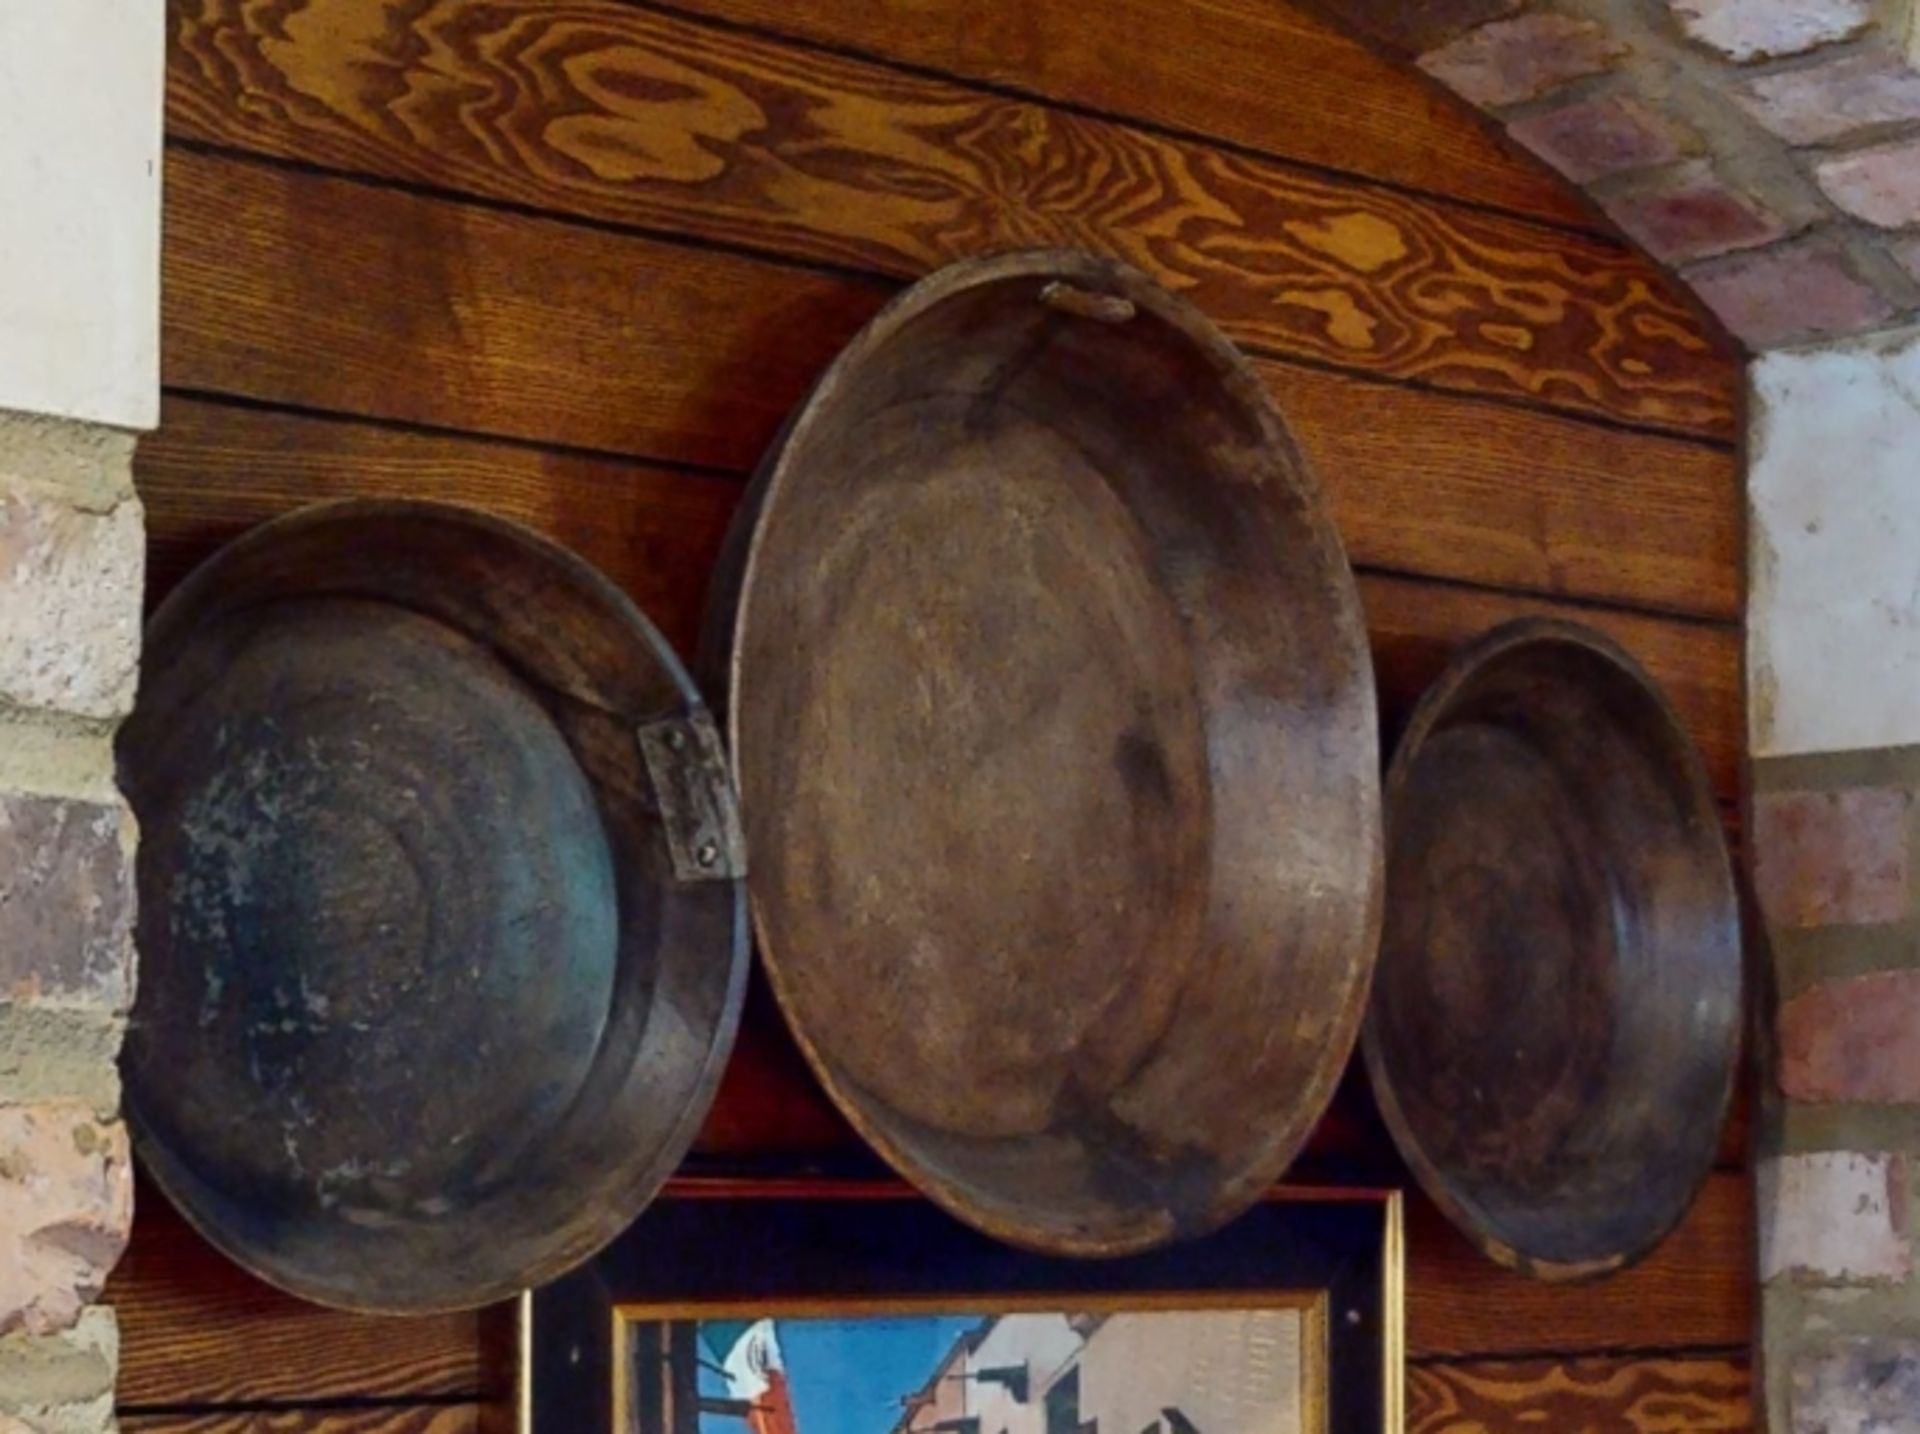 11 x Large Rustic Wooden Dishes - Wall Art From a Mexican Themed Restaurant - Image 6 of 8